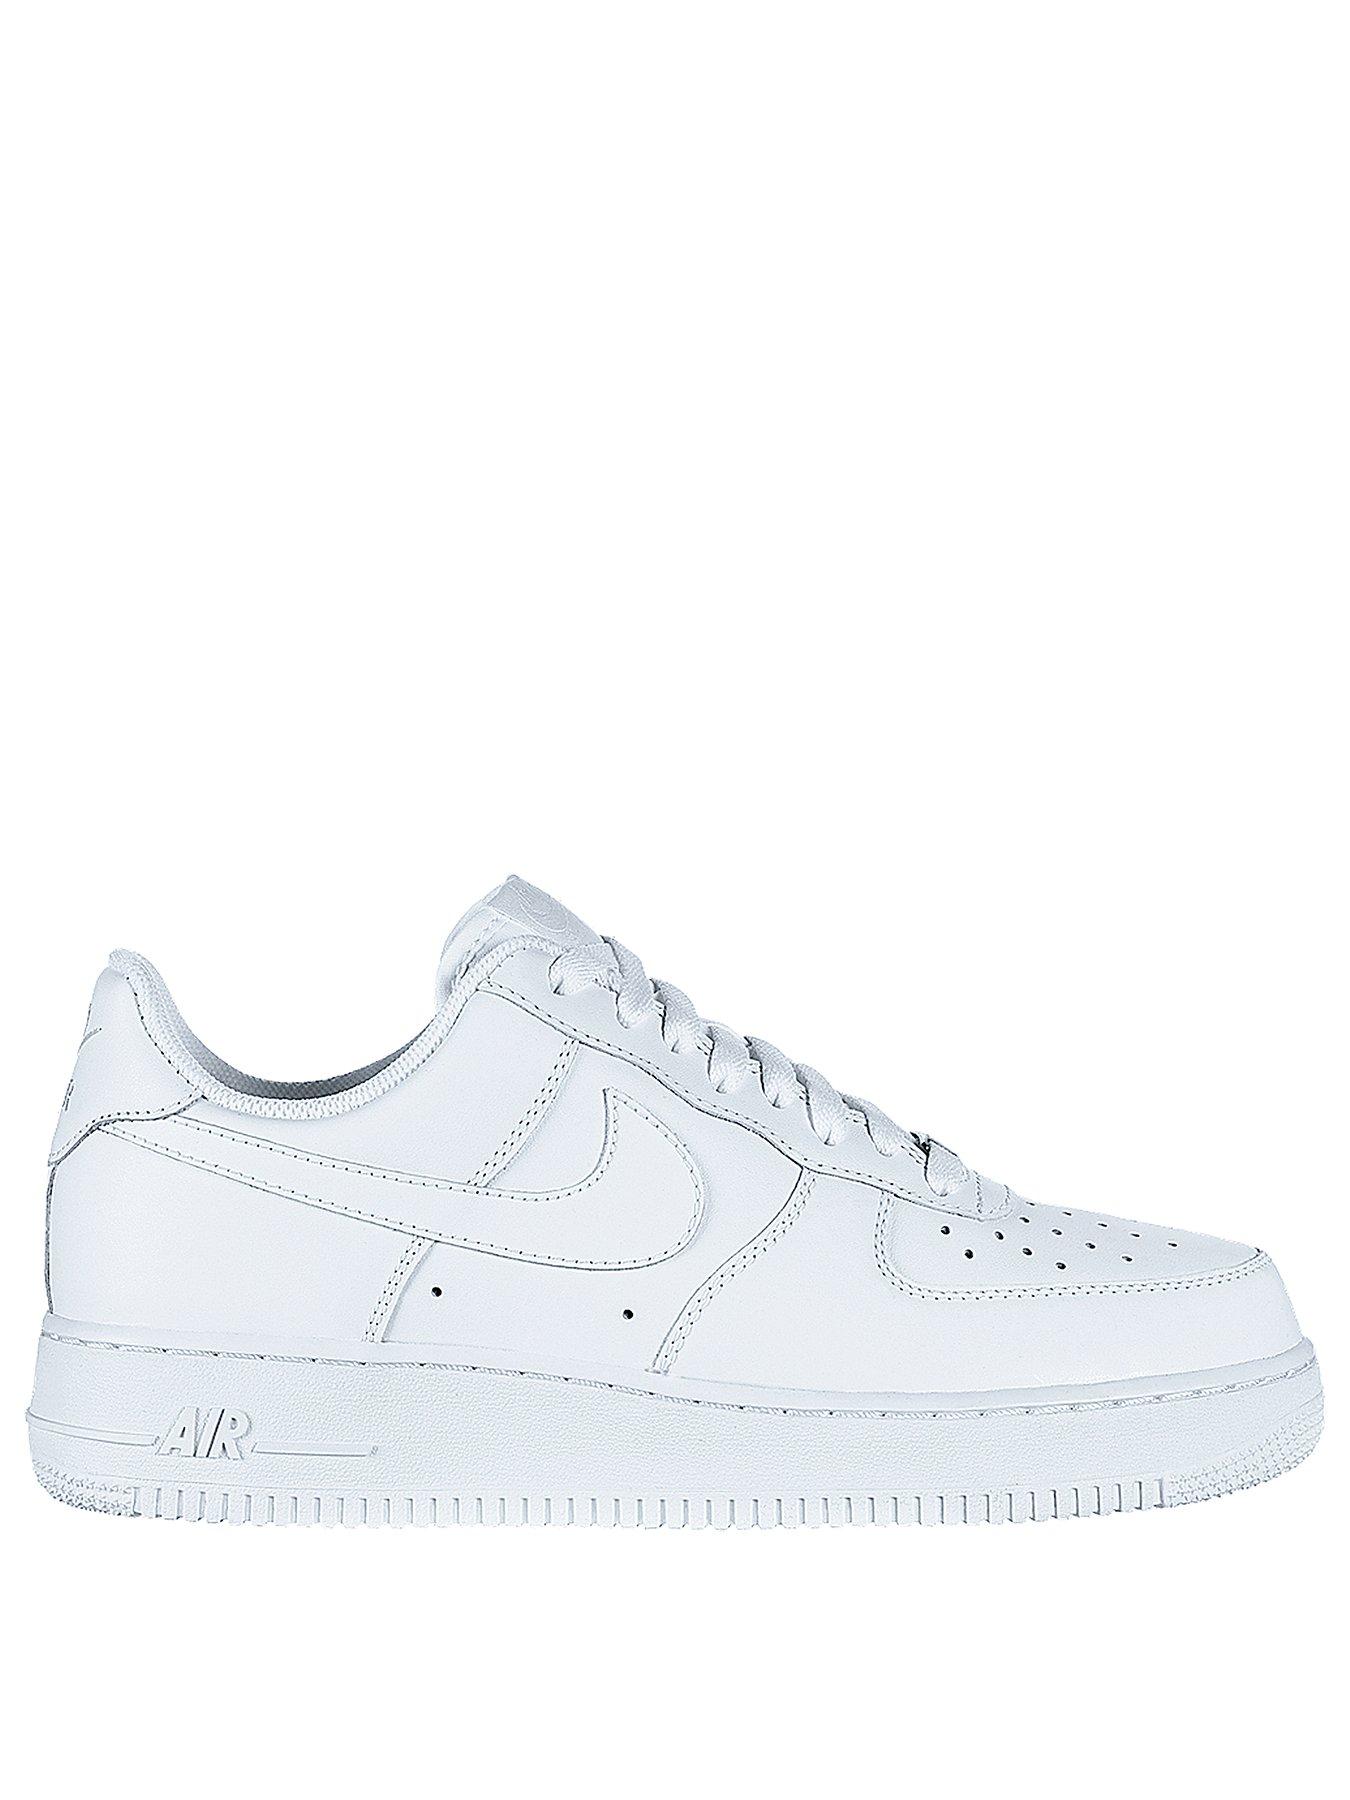 Nike Air Force 1 '07 Trainers | very.co.uk